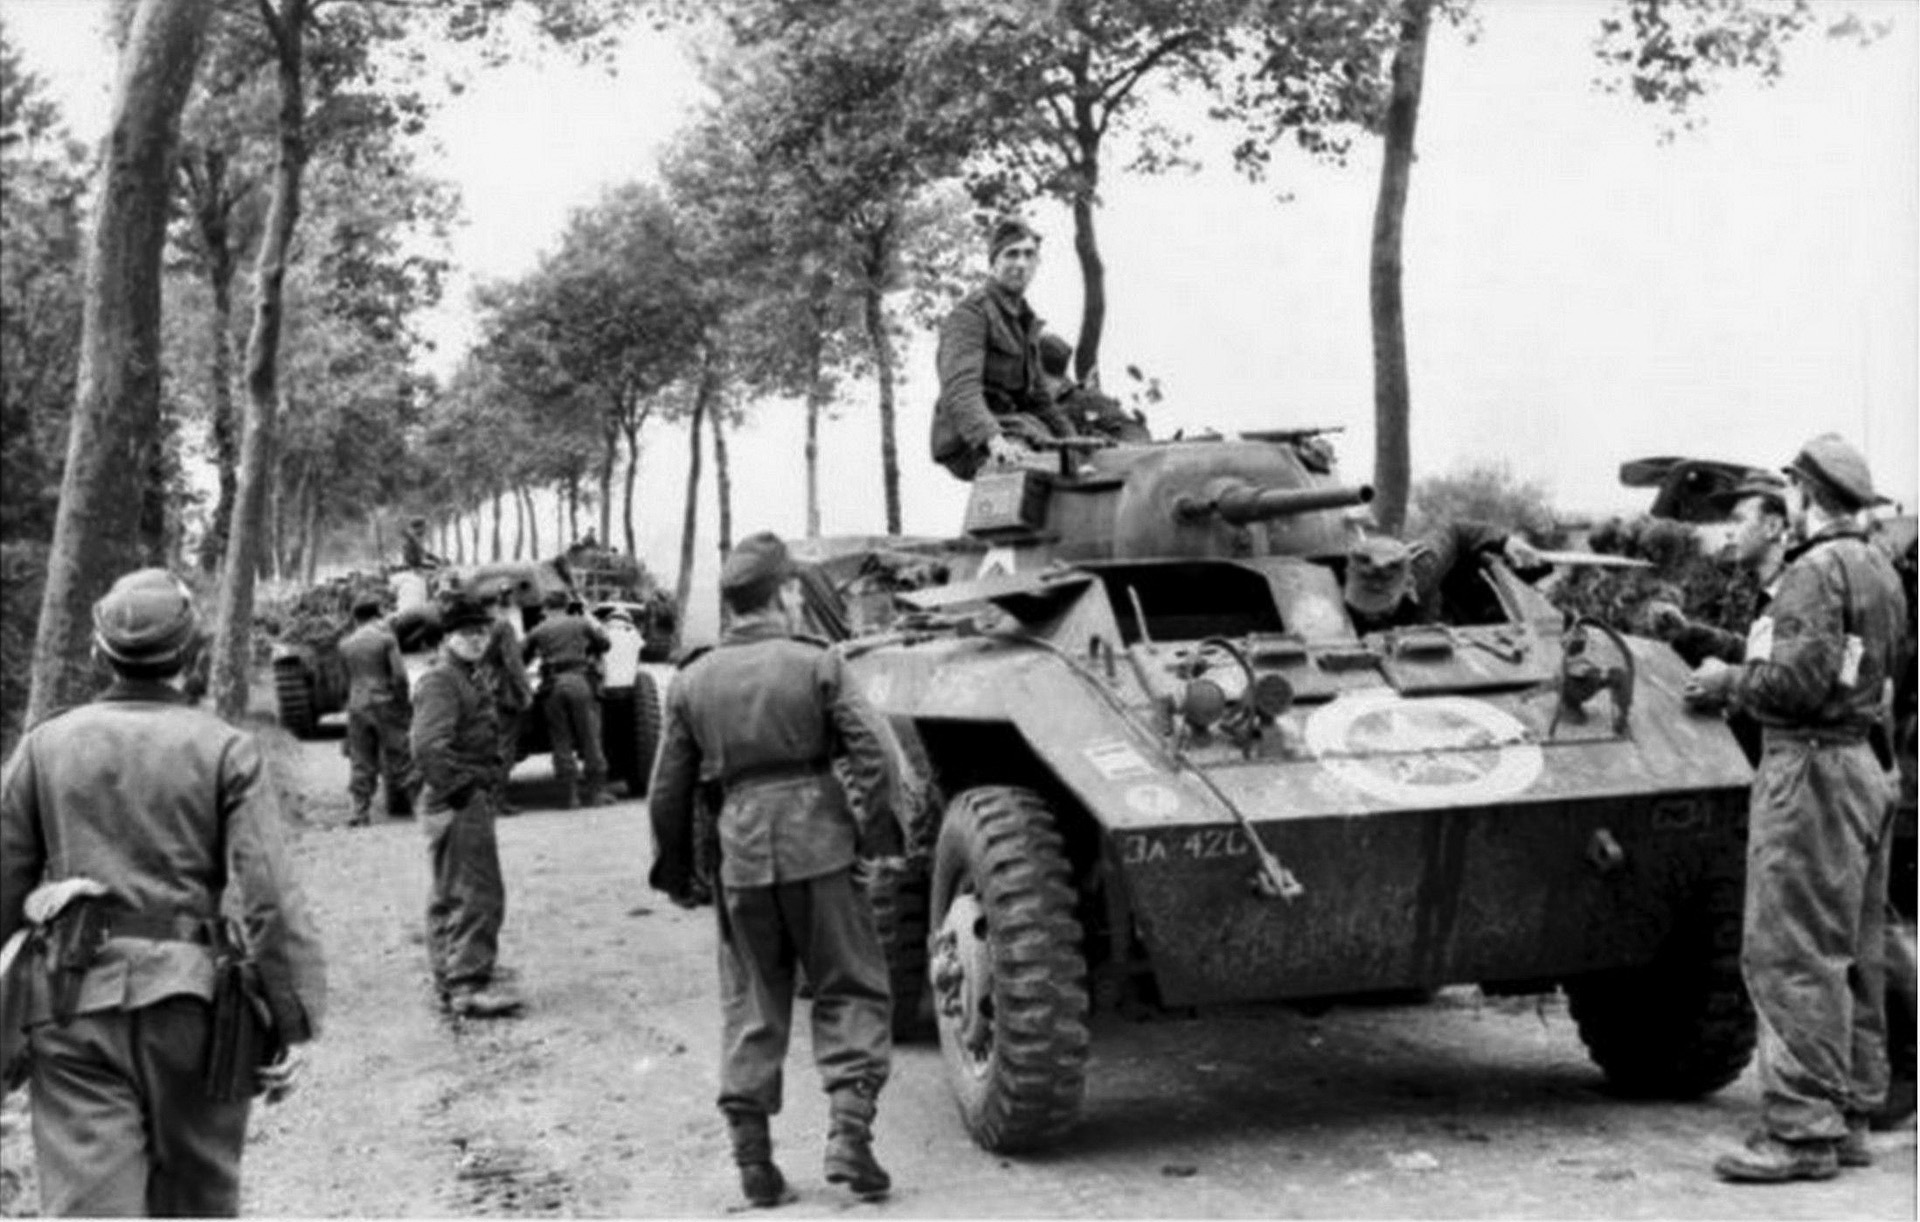 In this photo taken near Luneville in 1944, German soldiers make use of American-built M8 Greyhound armored cars they have previously captured. The original owners of the armored cars were the troops of the U.S. 42nd Cavalry Squadron, and the Germans belong to Panzerbrigade 111.